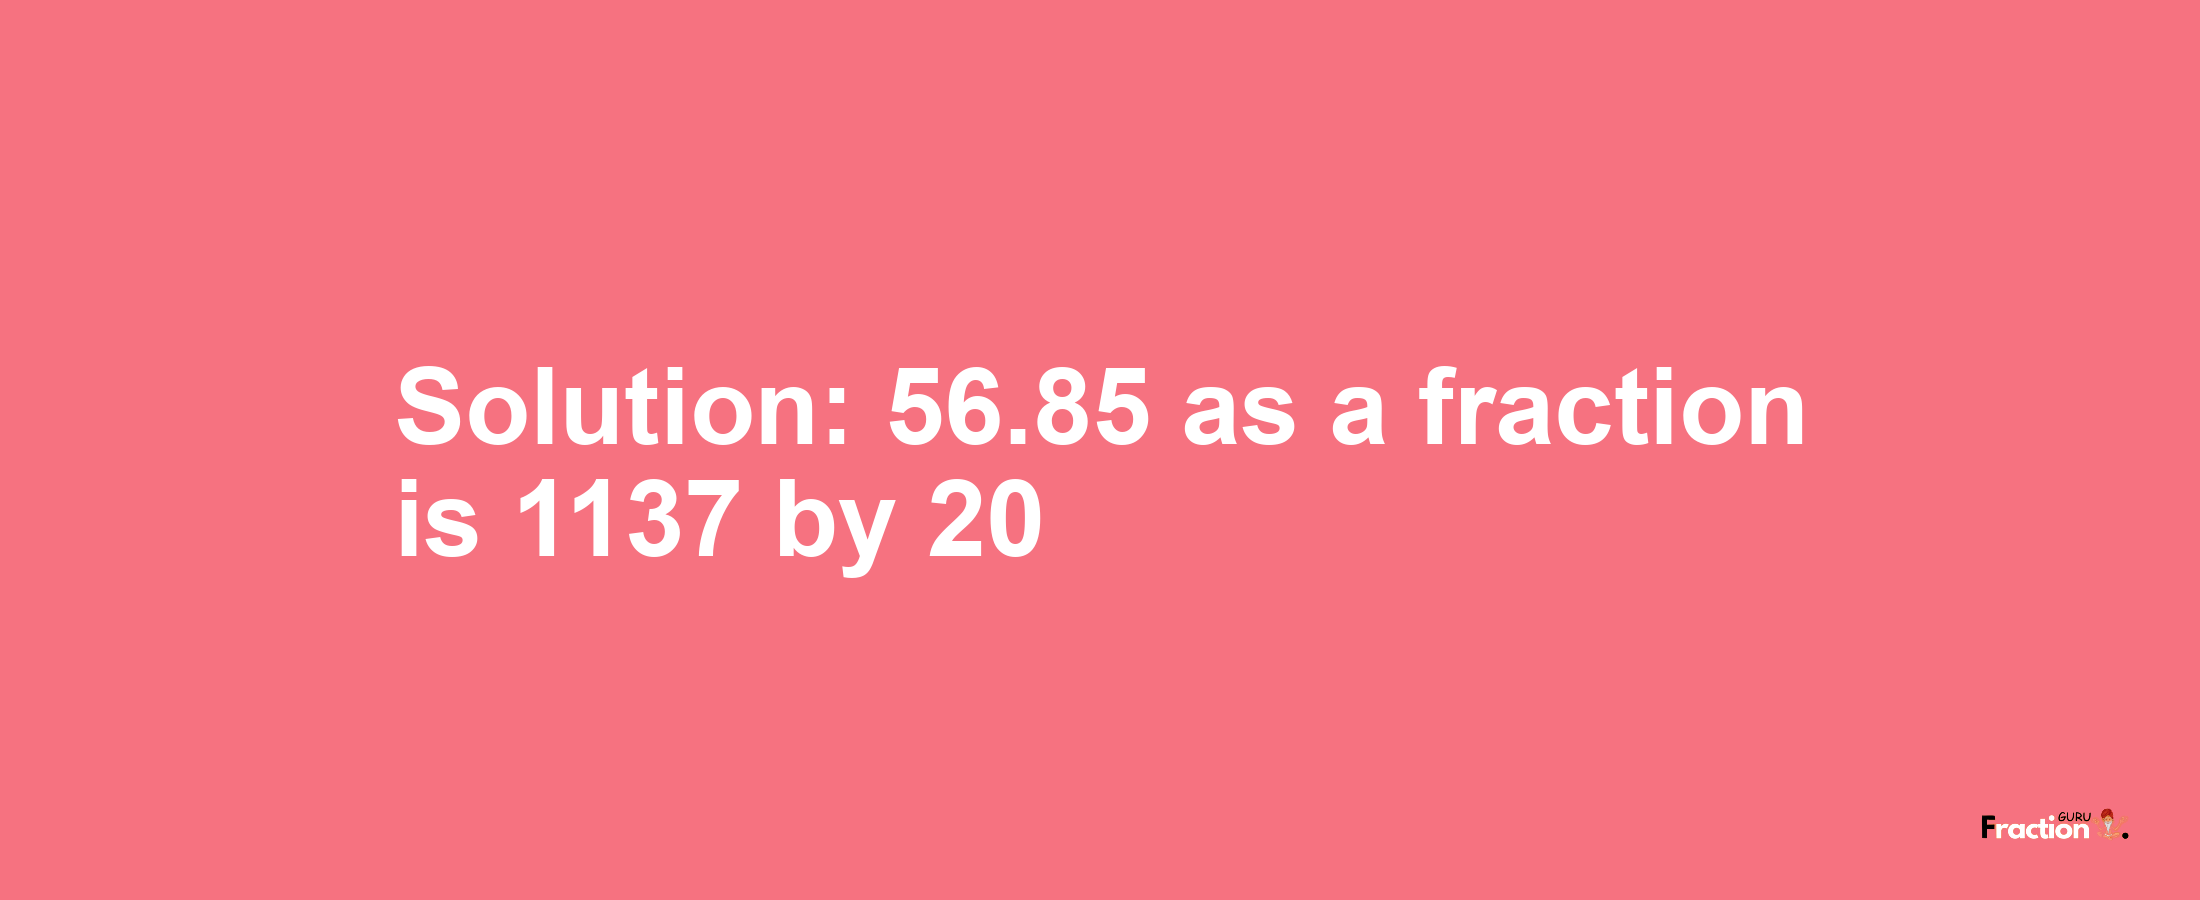 Solution:56.85 as a fraction is 1137/20